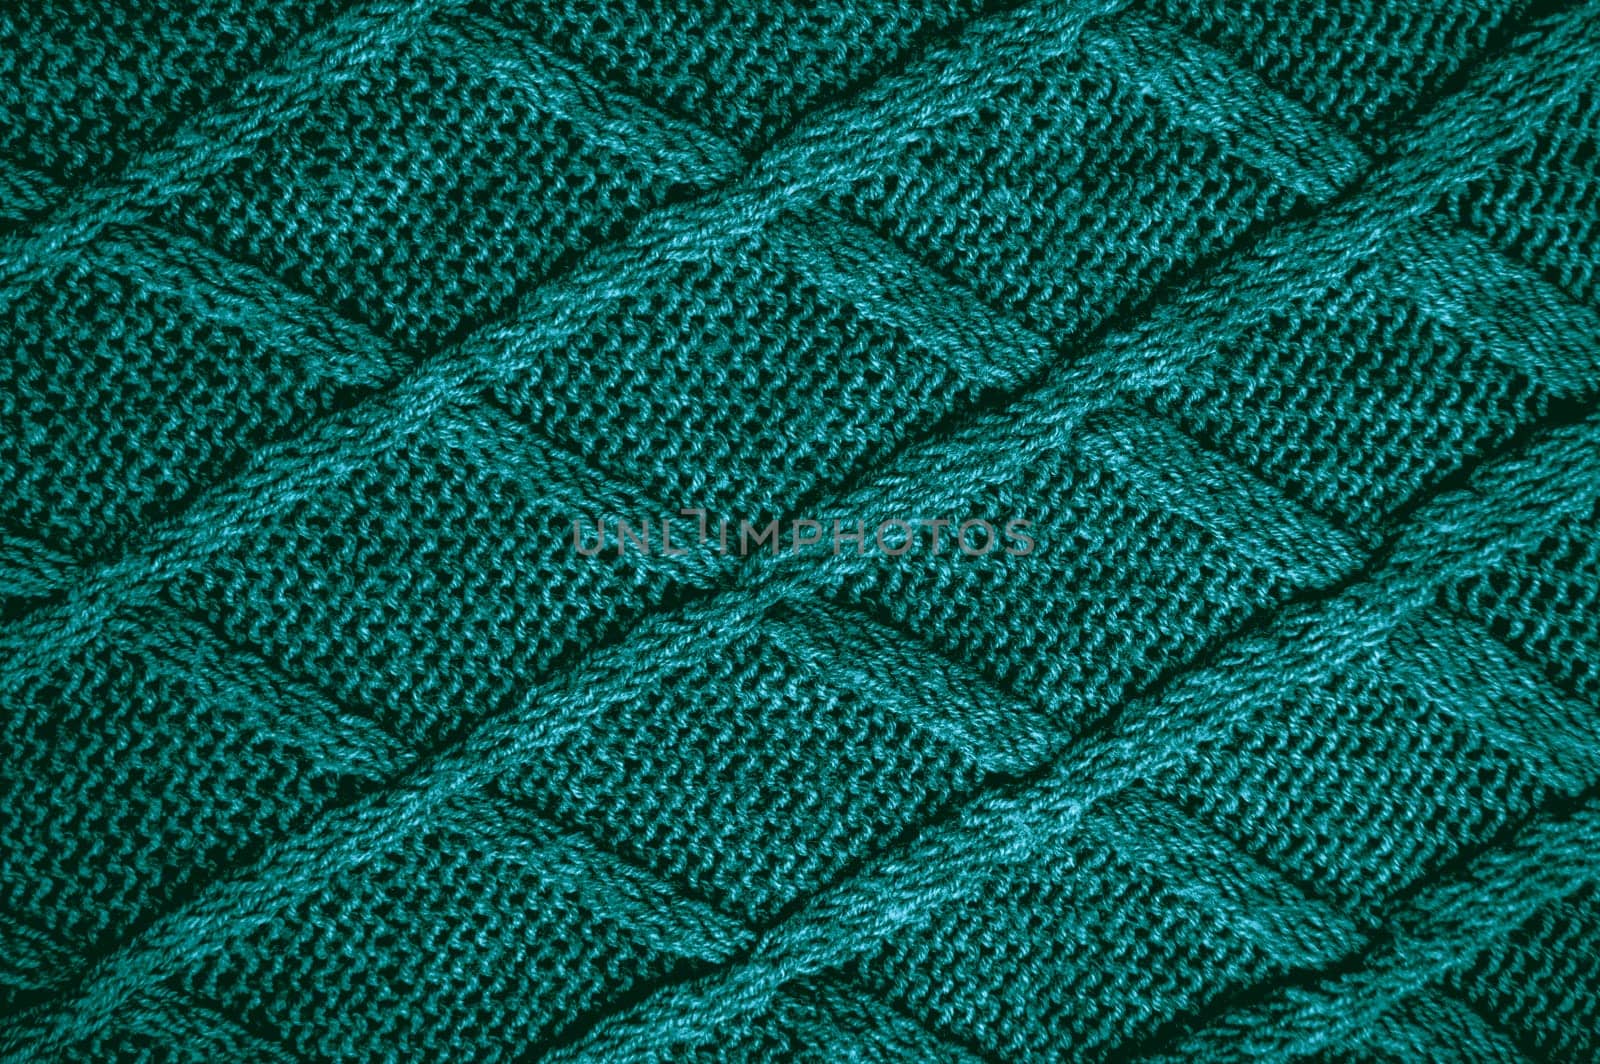 Pullover Texture. Organic Wool Background. Cotton Jacquard Christmas Textile. Knitwear Texture. Structure Thread. Nordic Holiday Canvas. Closeup Cloth Wallpaper. Linen Pullover Texture.